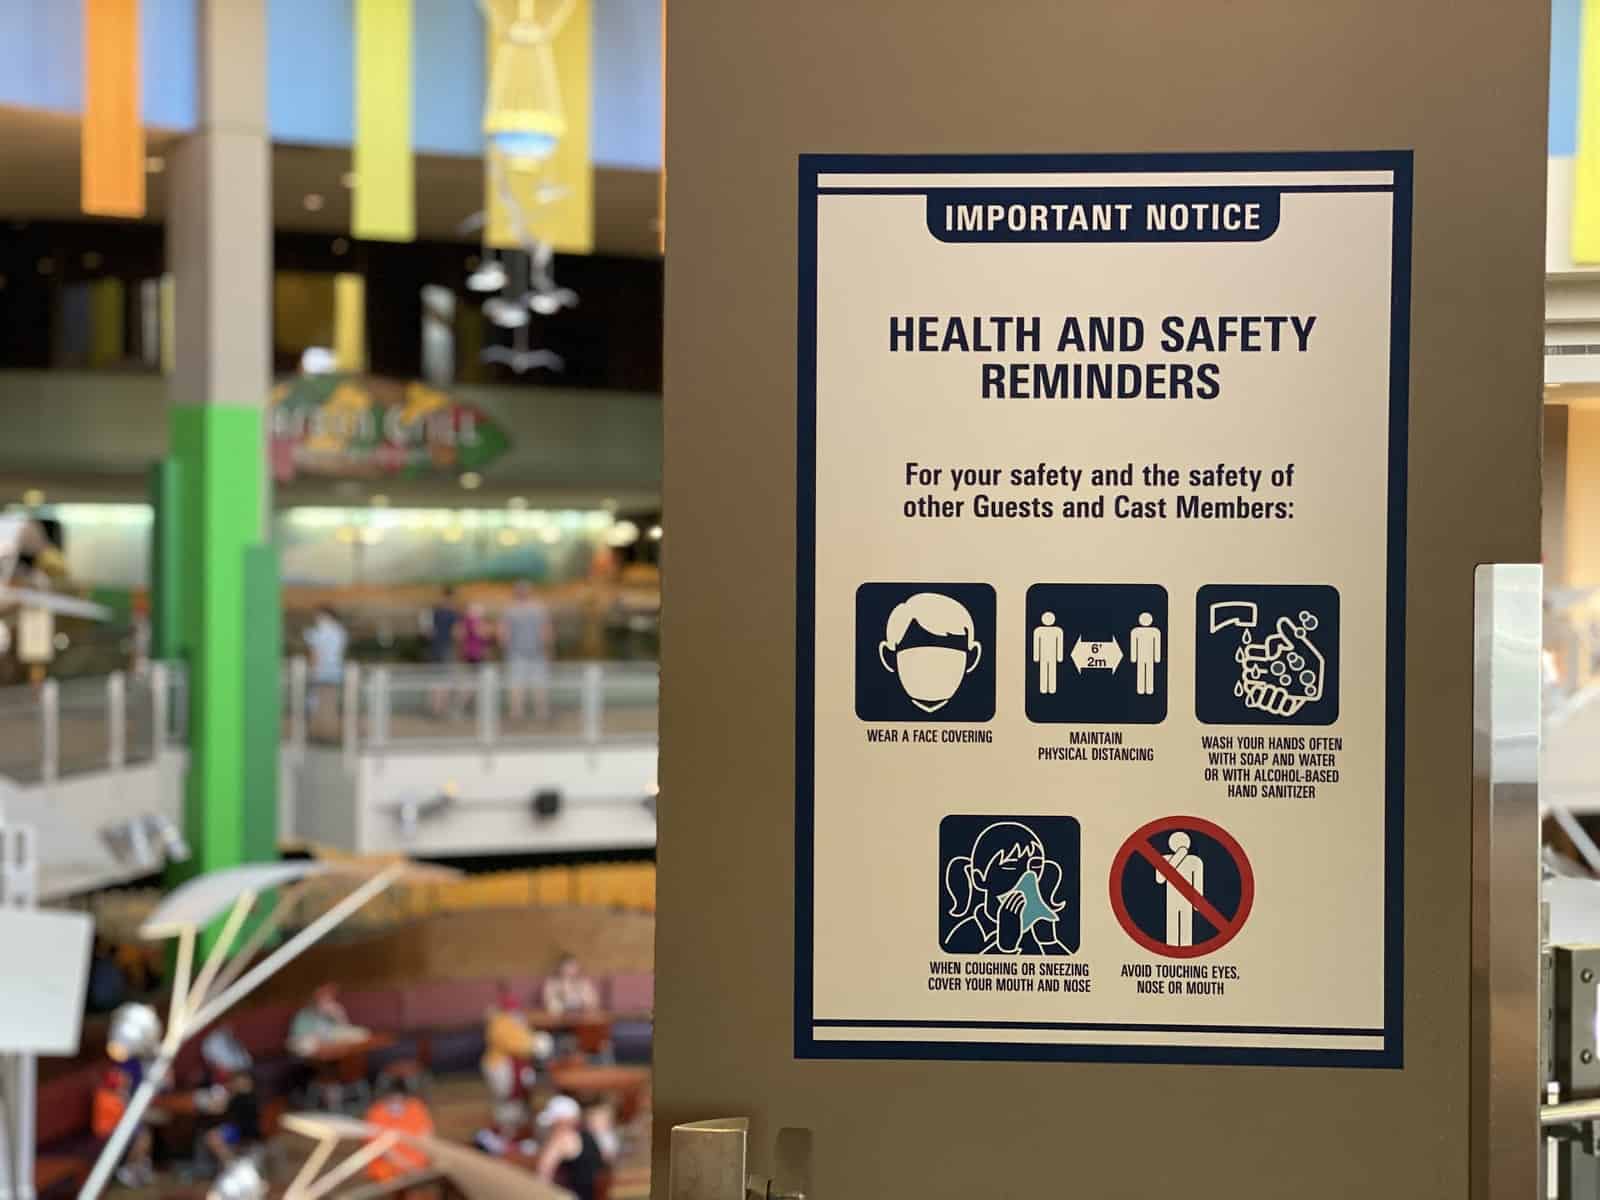 Disney World Asks Guests To Reschedule If They Can’t Wear Masks Properly